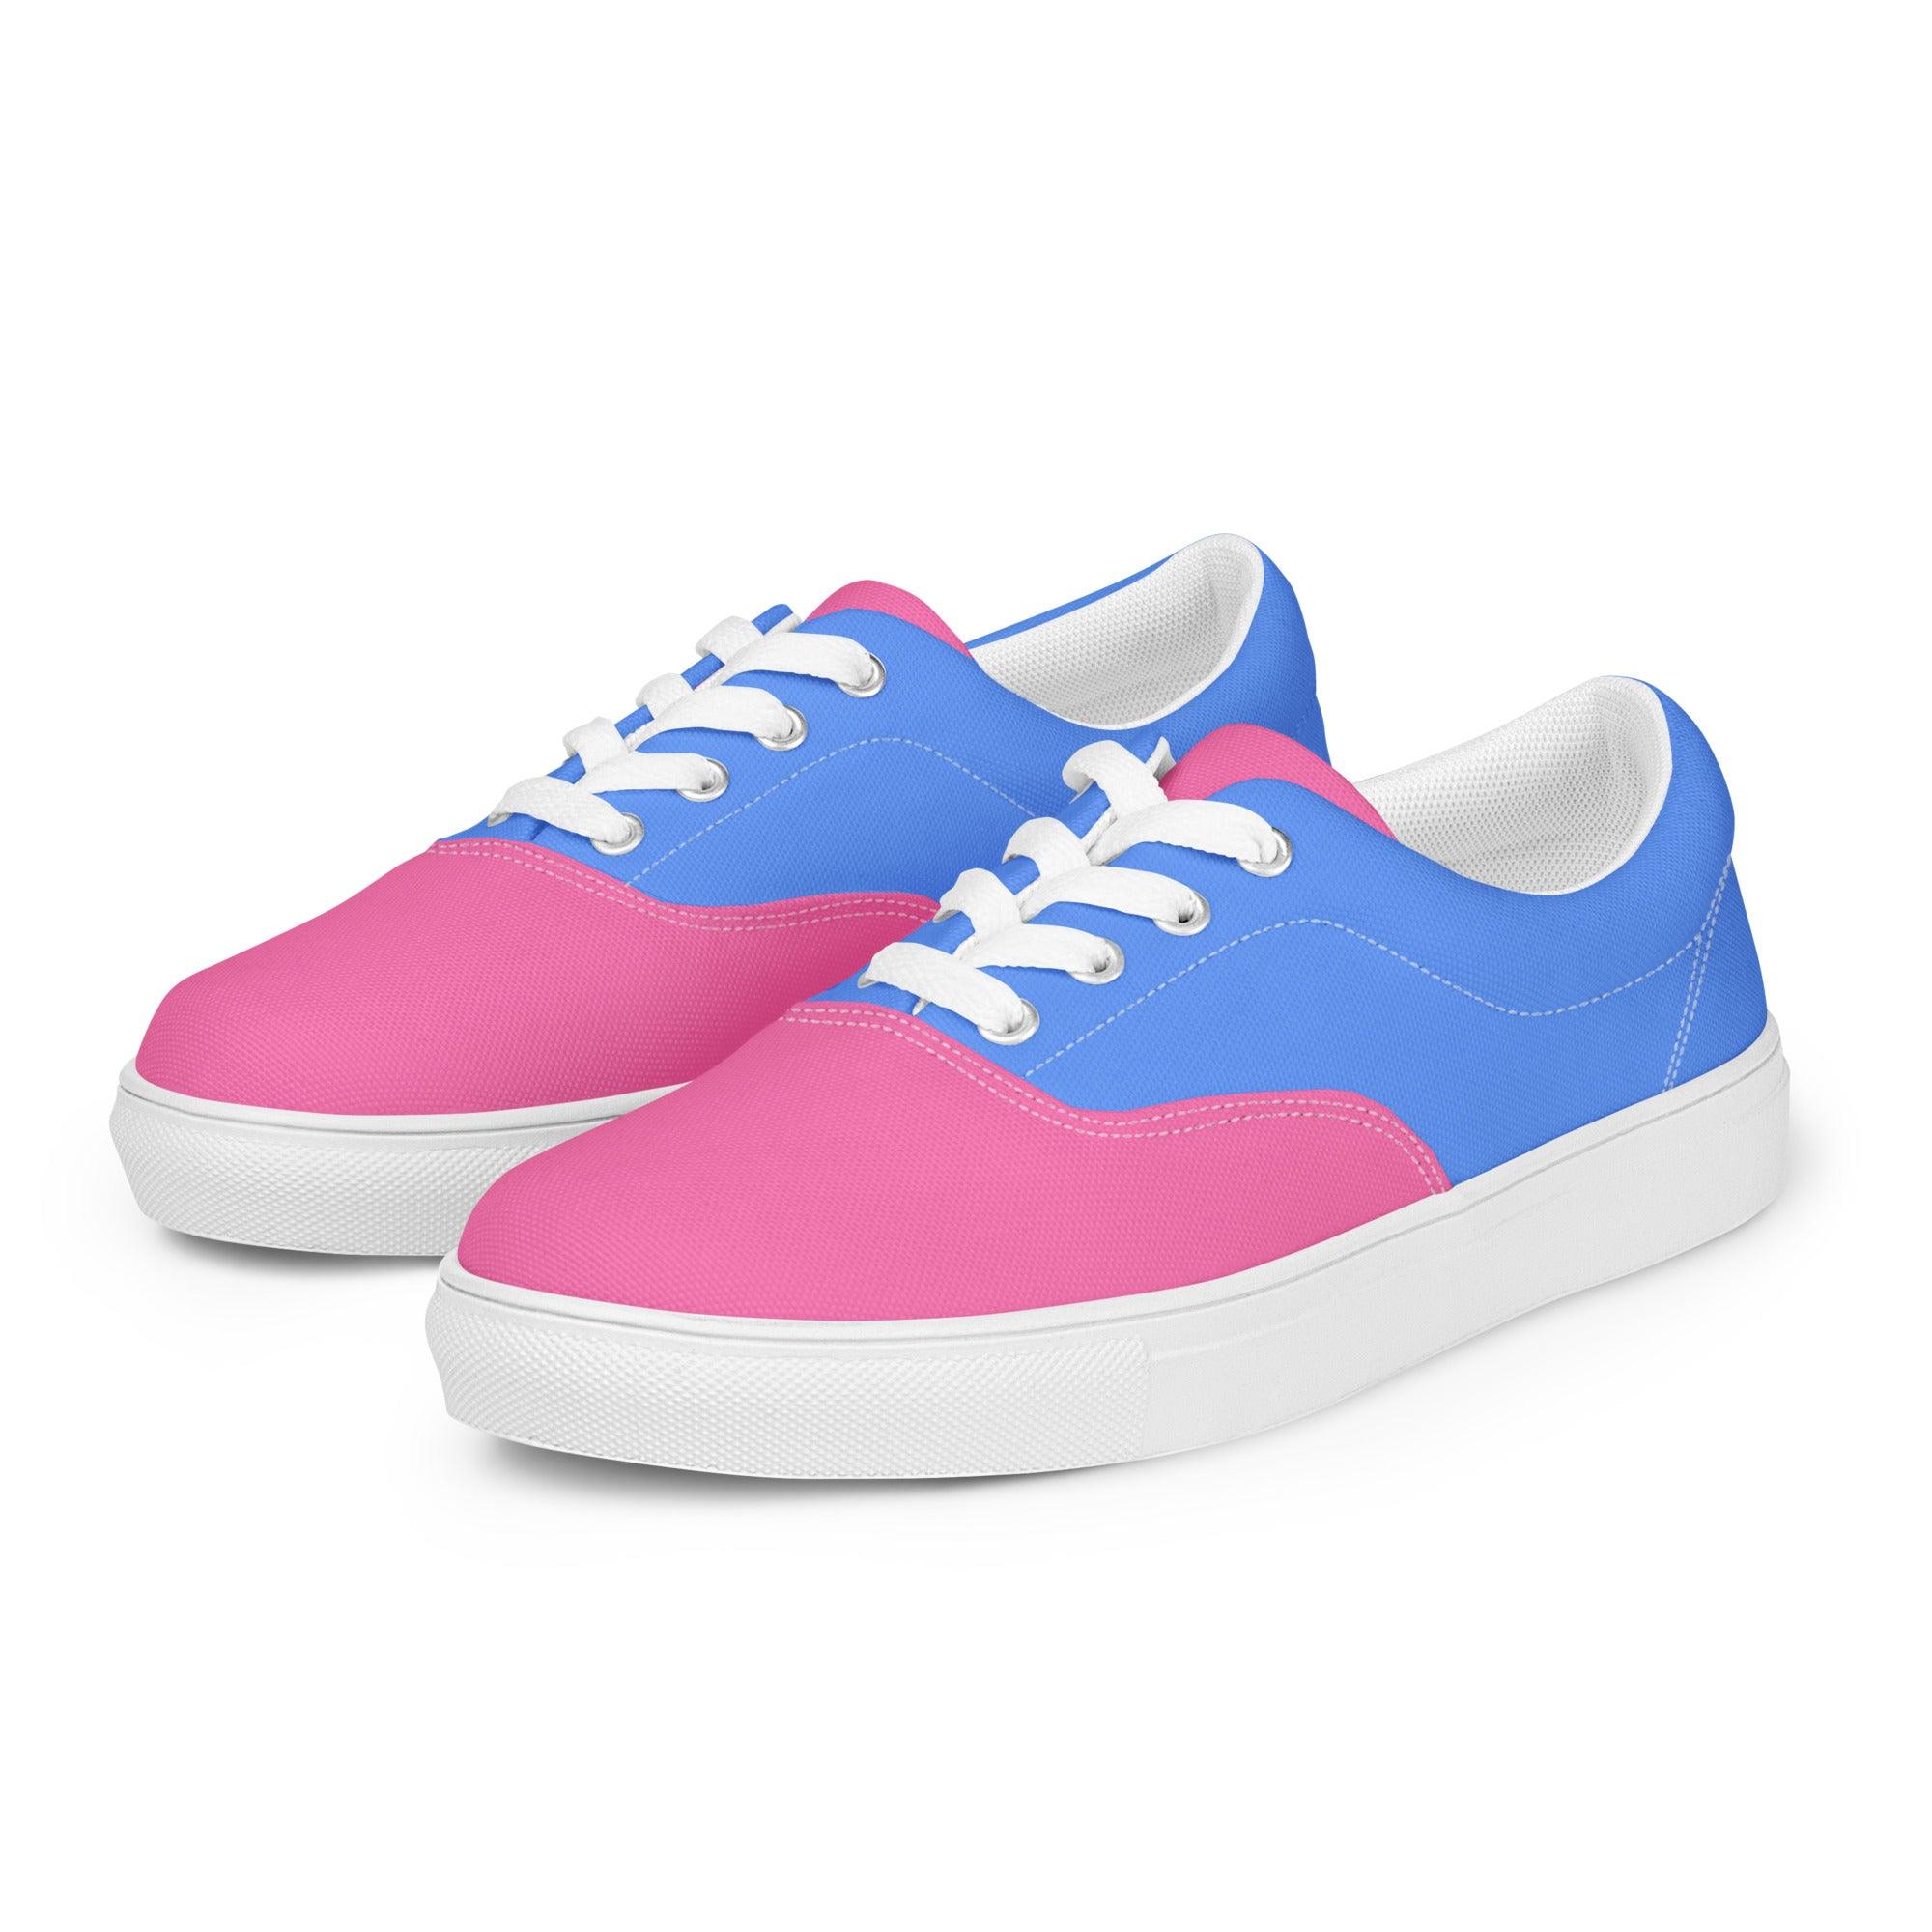 Sechia Hot Pink & Light Blue Color Block Lace Up Canvas Sneakers Breathable Summer Playful Bold Vibrant Athleisure Sports Gym Walking Active Solid Coordinate